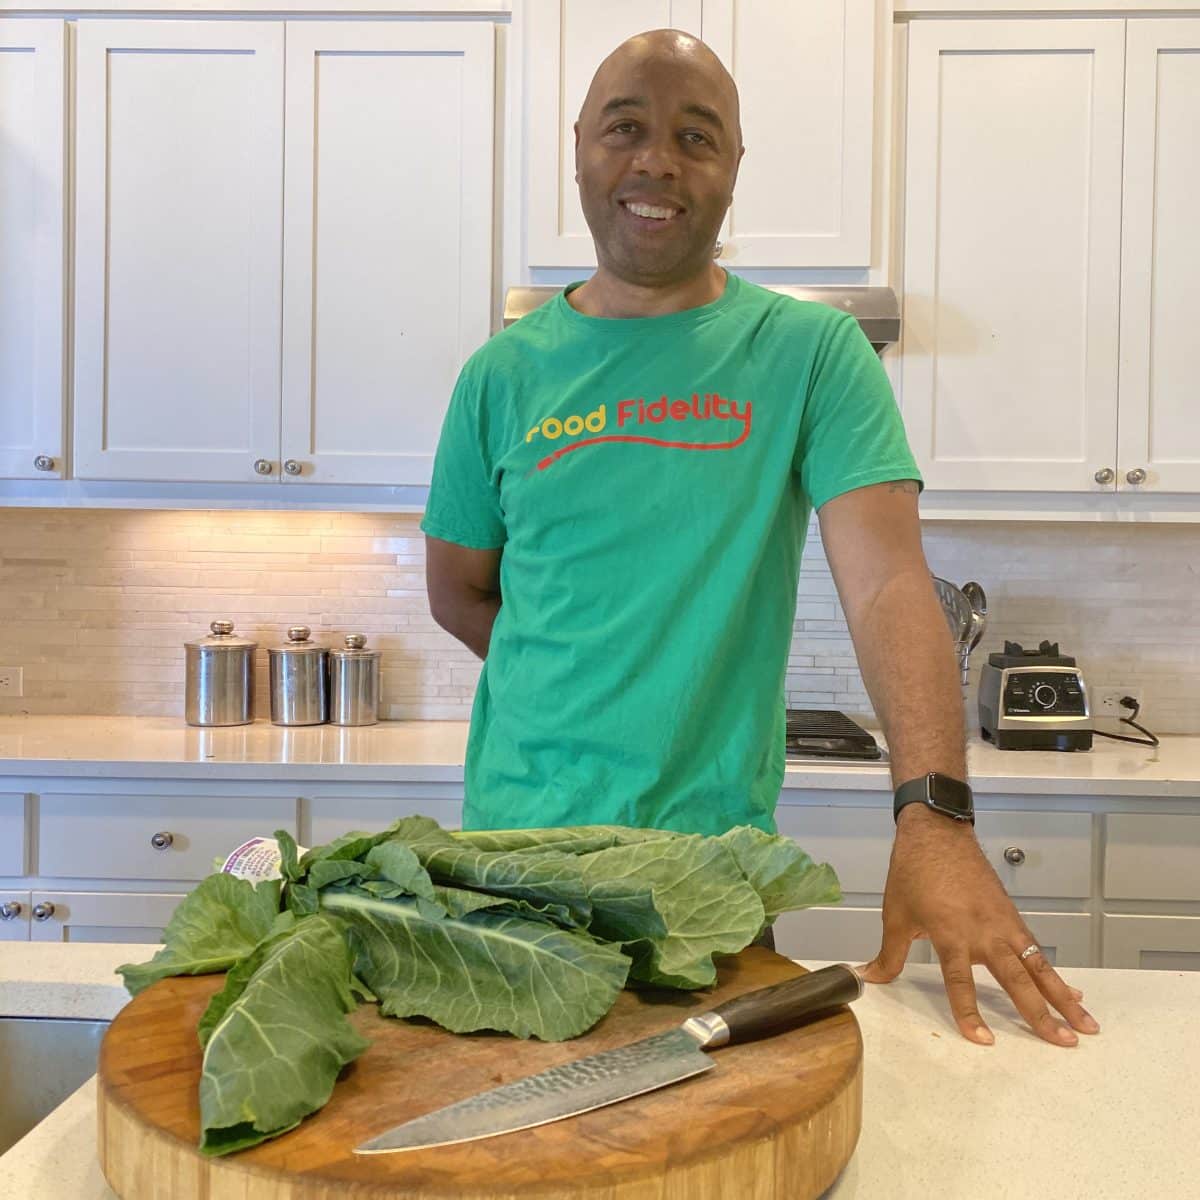 Eat The Culture - Marwin Brown, food creator at Food Fidelity